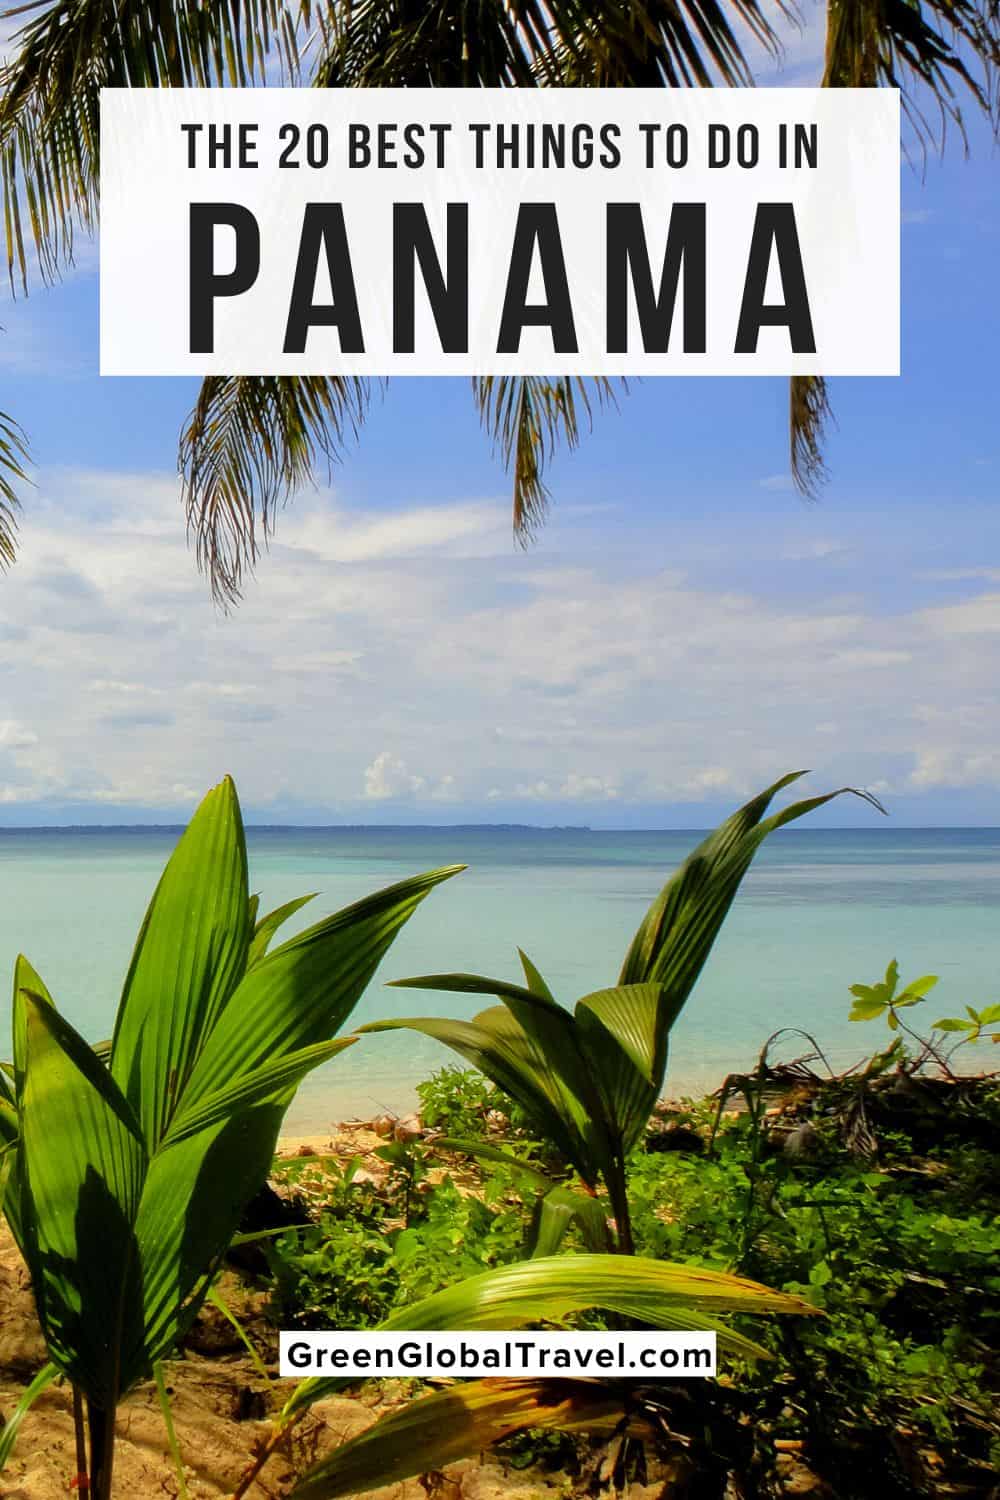 Our picks for the 20 Best Things to Do in Panama, Central America with a focus on Panama attractions geared to nature and history lovers. | things to do in panama city panama | what to do in panama | panama things to do | attractions in panama | places to visit in panama | what is panama known for | best places to visit in panama | destinations in panama | panama activities | panama destinations | panama in central america | panama places to visit | things to do in bocas del toro |